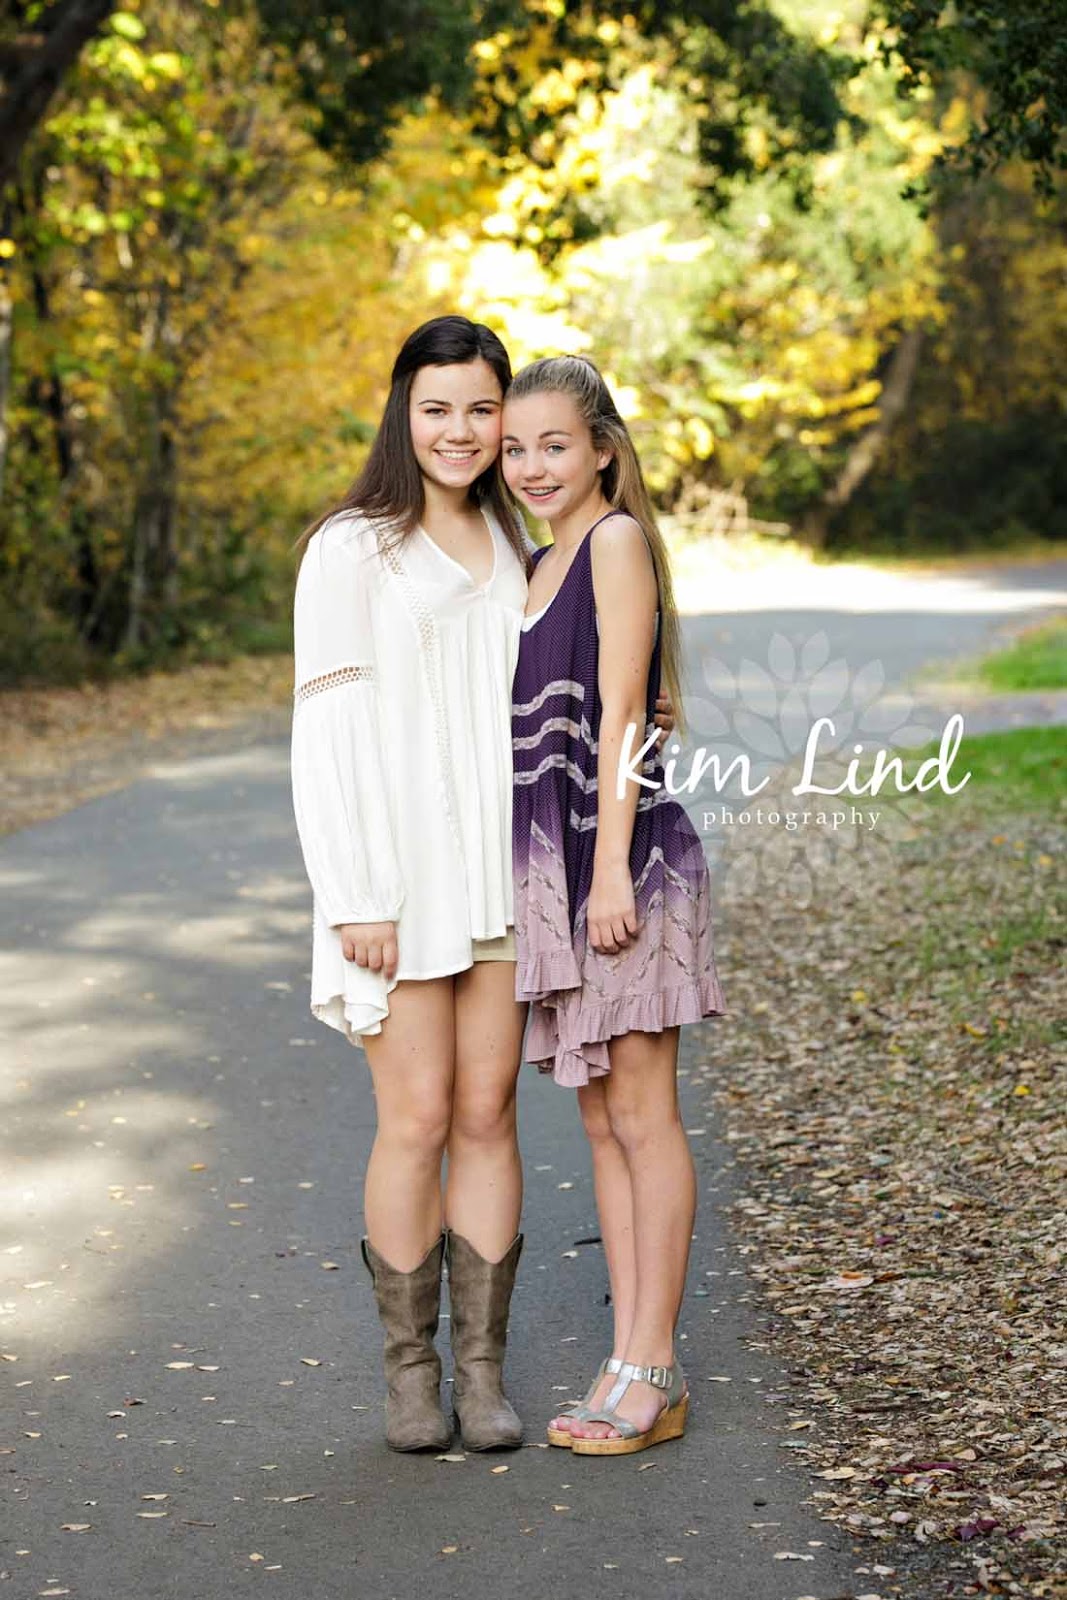 KIM LIND PHOTOGRAPHY {the blog}: The 